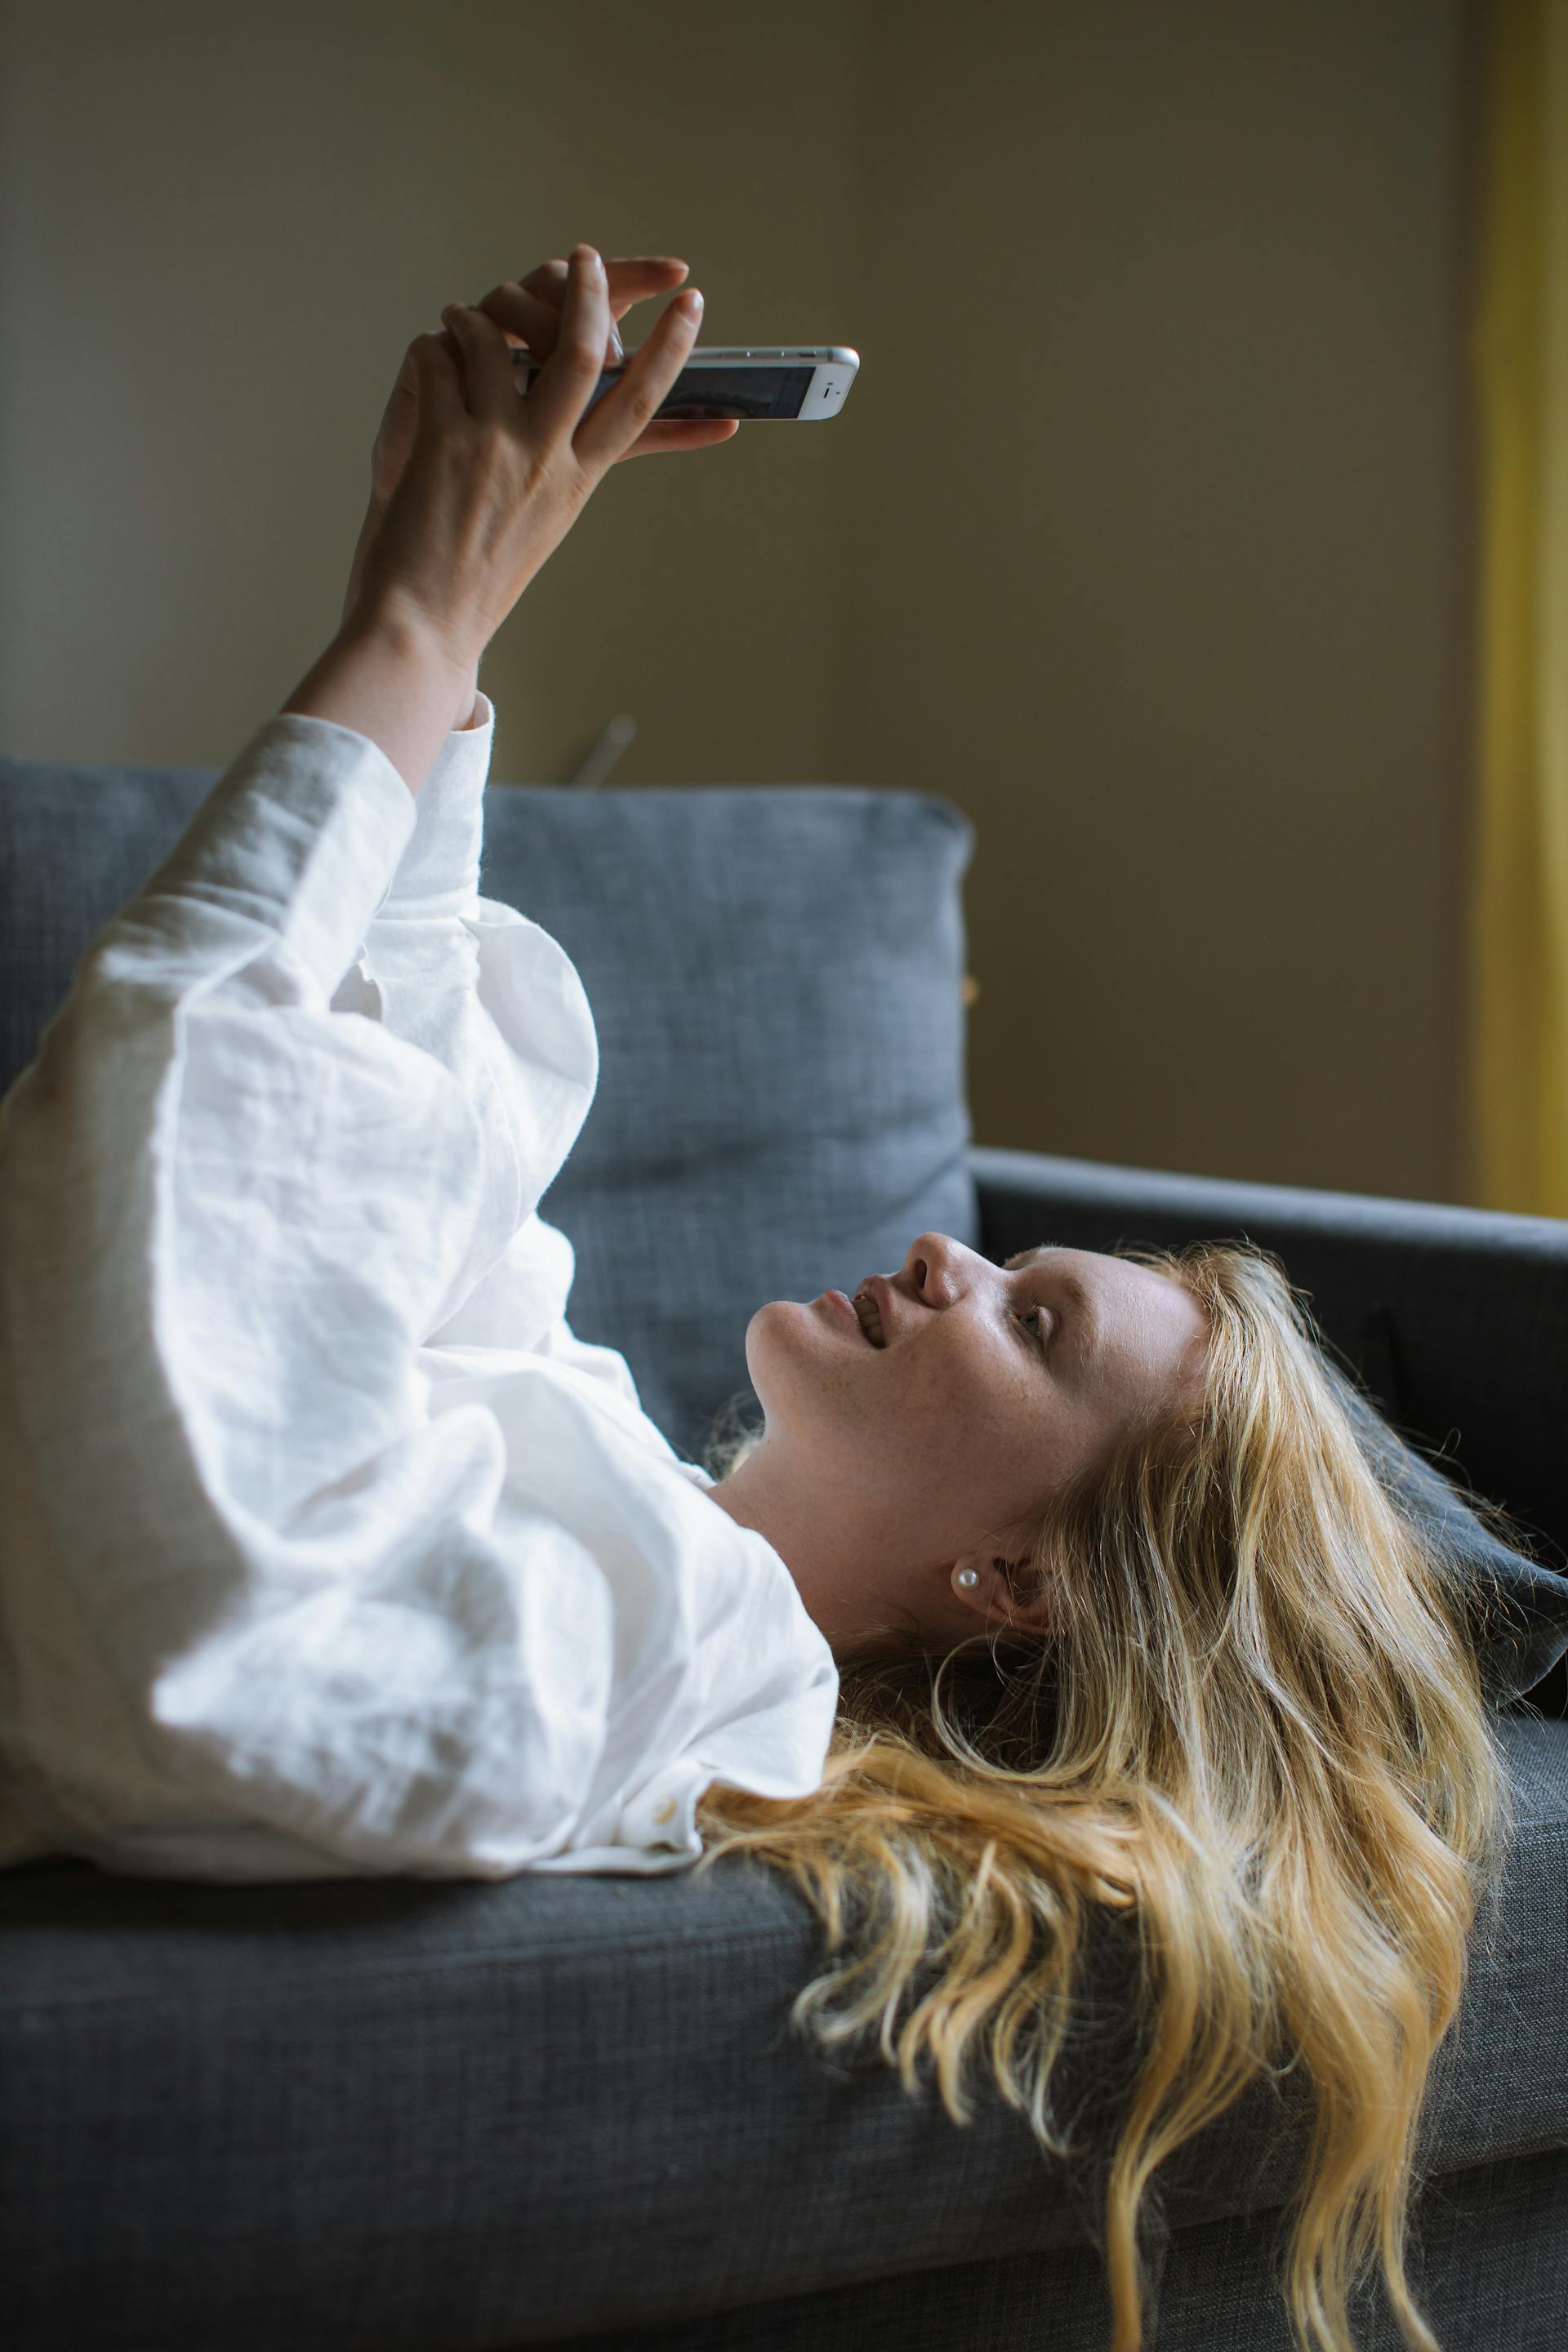 A young woman using her phone while lying on a sofa | Source: Pexels